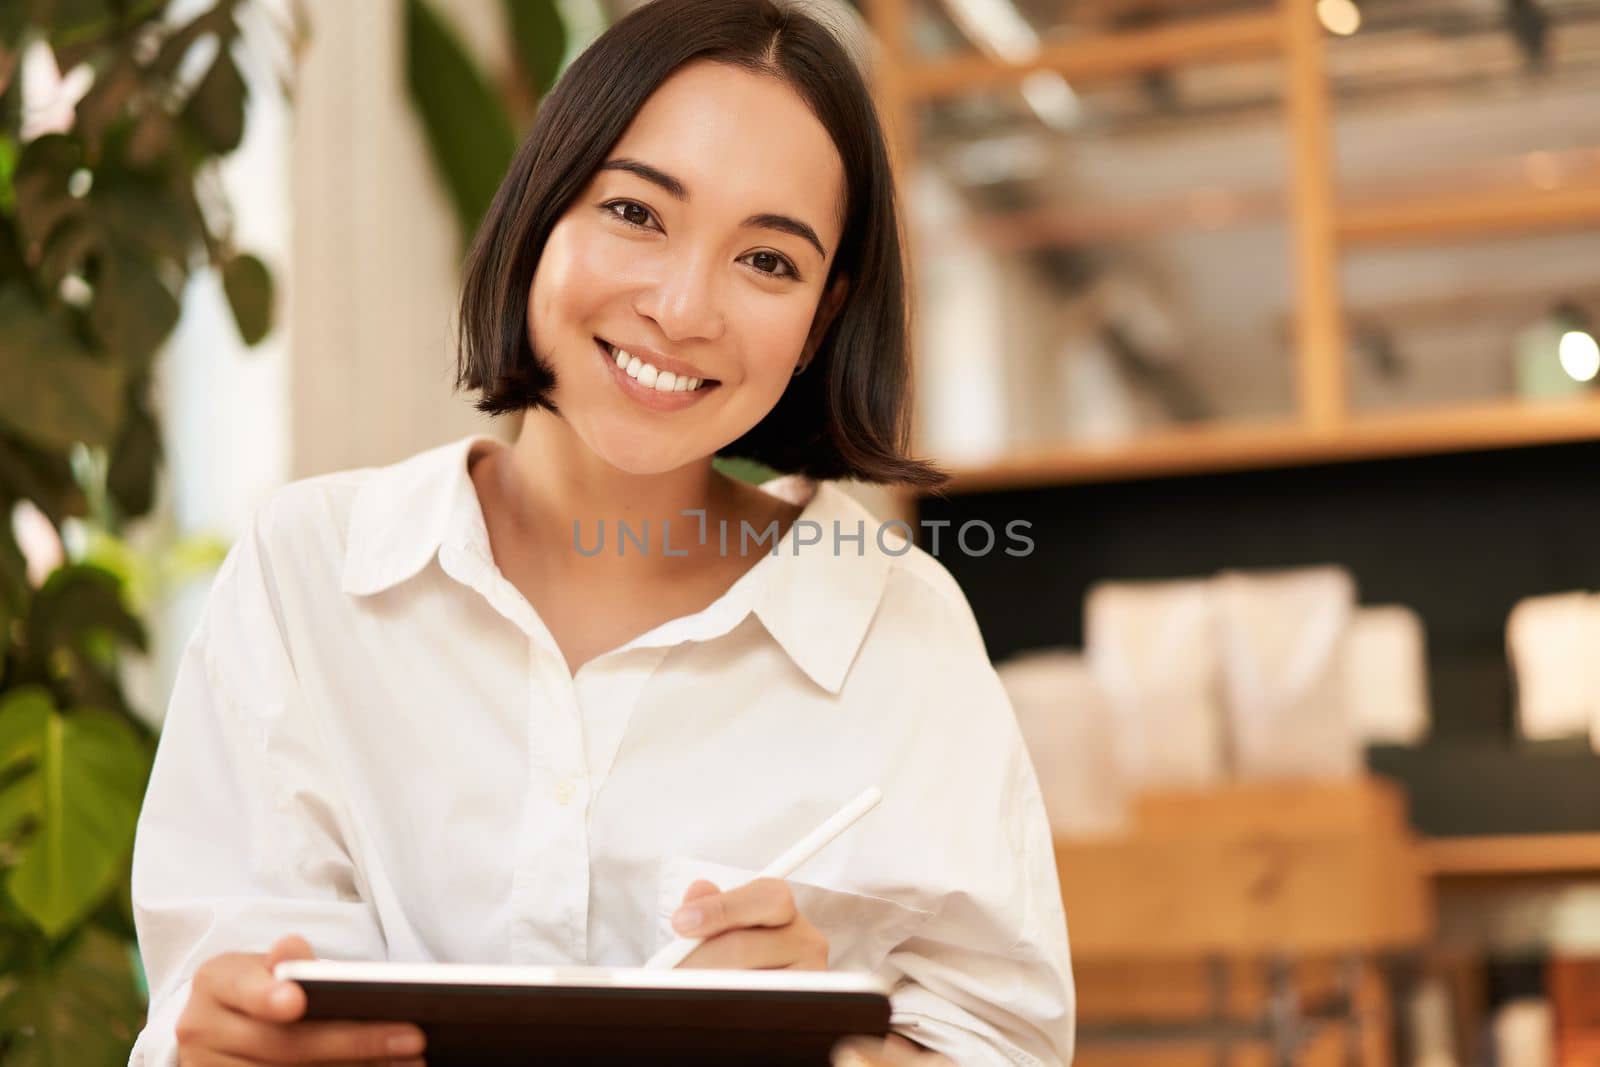 Young beautiful artist, woman drawing on tablet with graphic pen, smiling happily. People and lifestyle concept